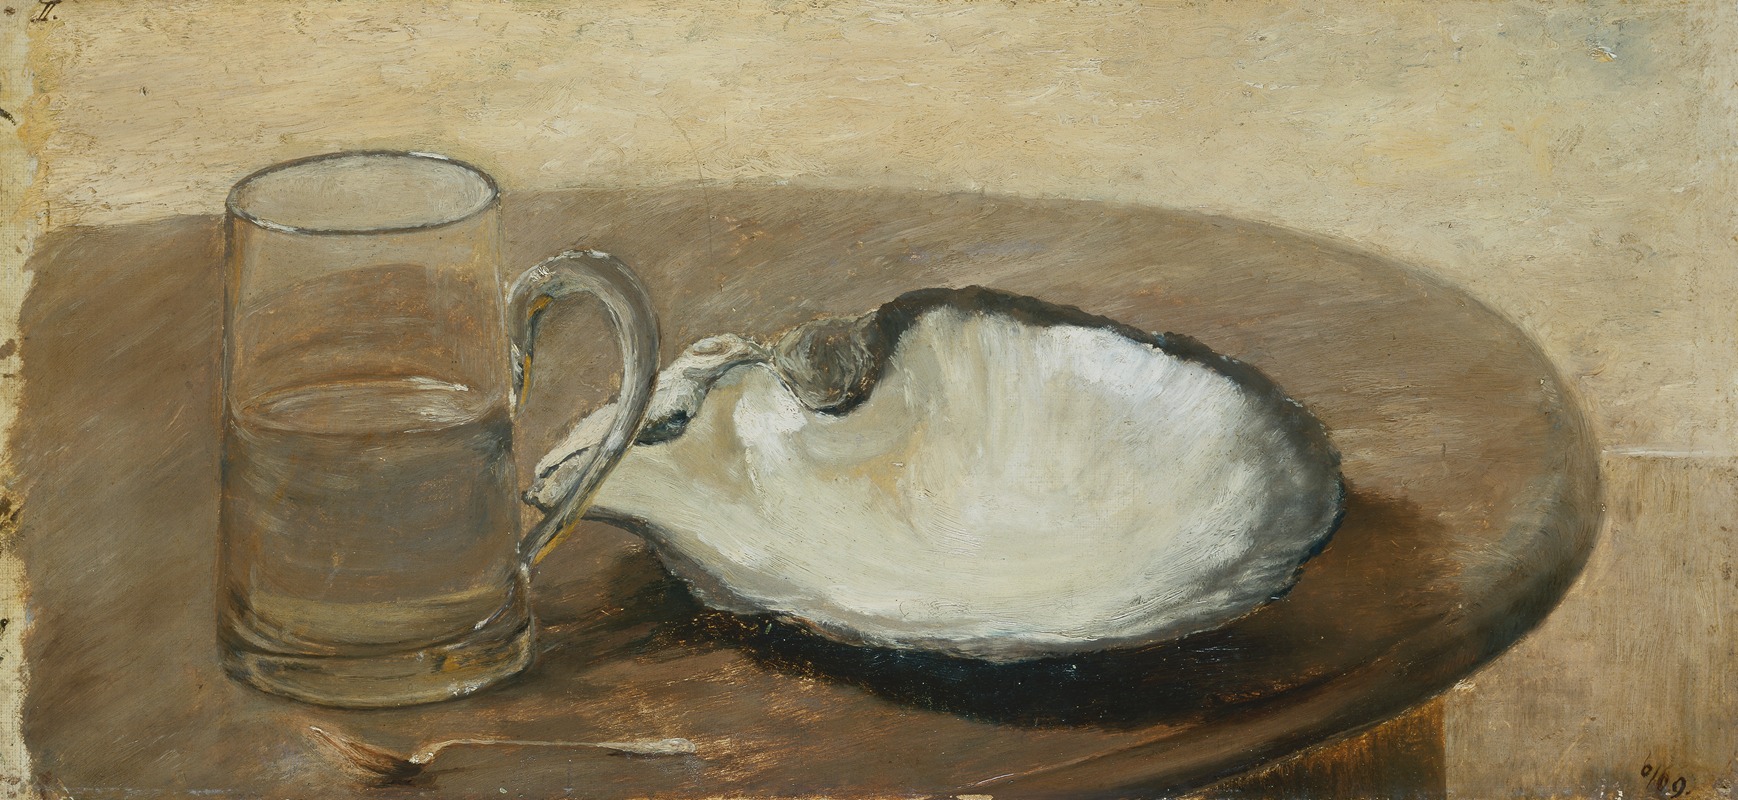 Louis Eysen - Still Life with Shell, Water Glass and Spoon